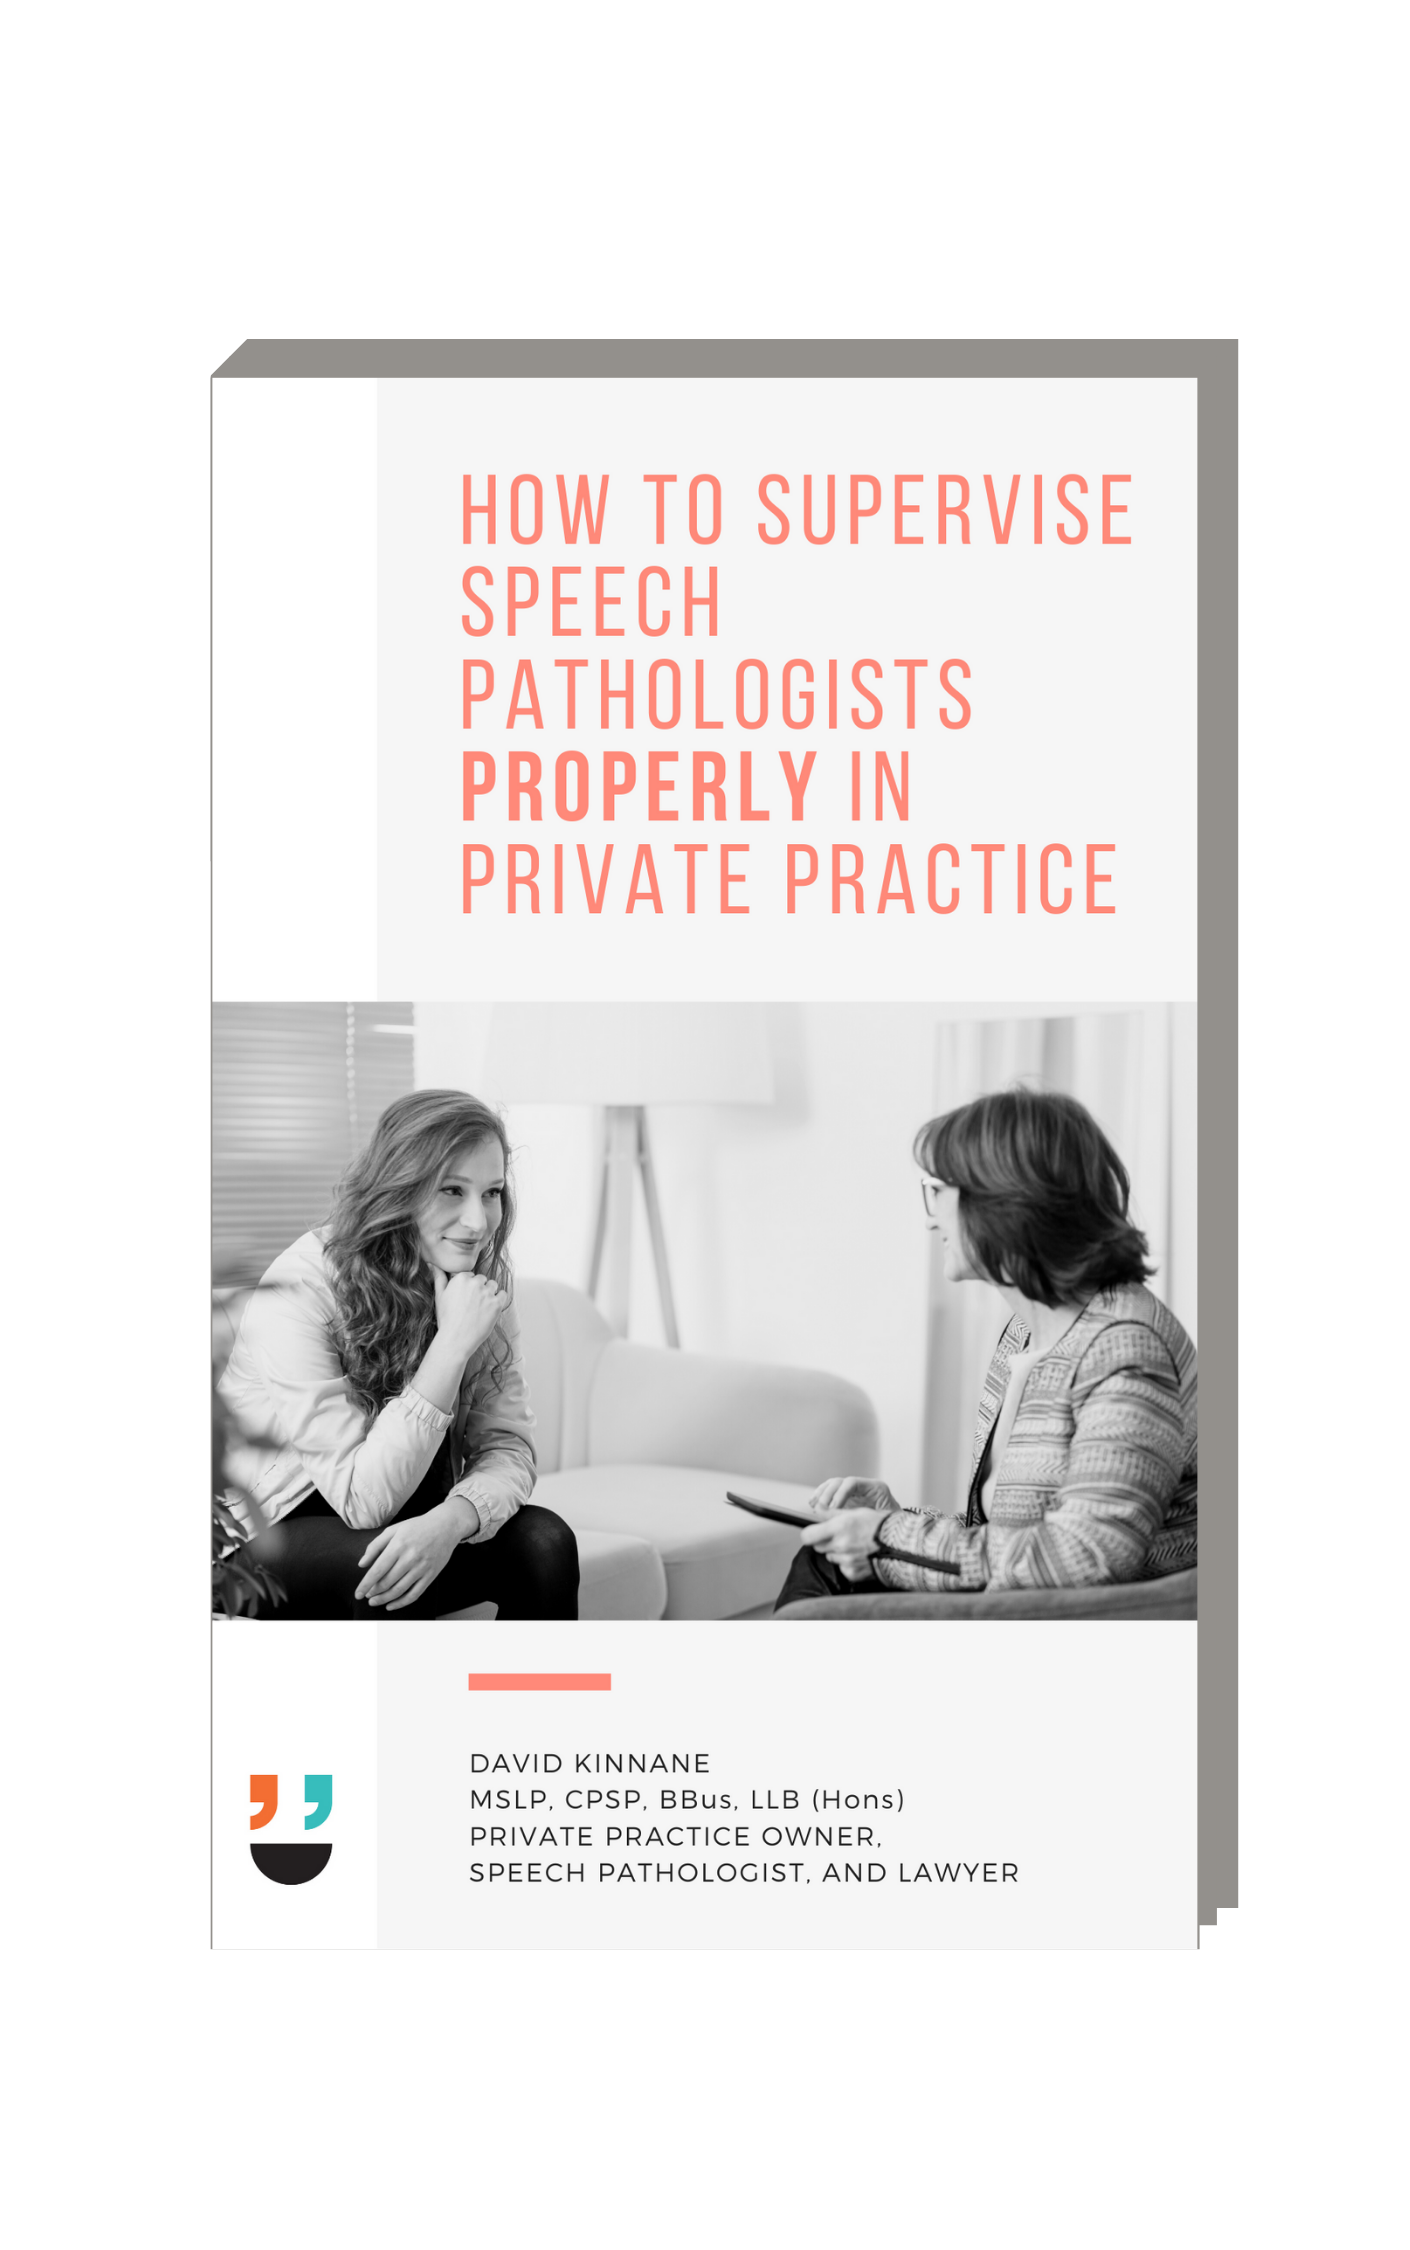 How to Supervise Speech Pathologists Properly in Private Practice